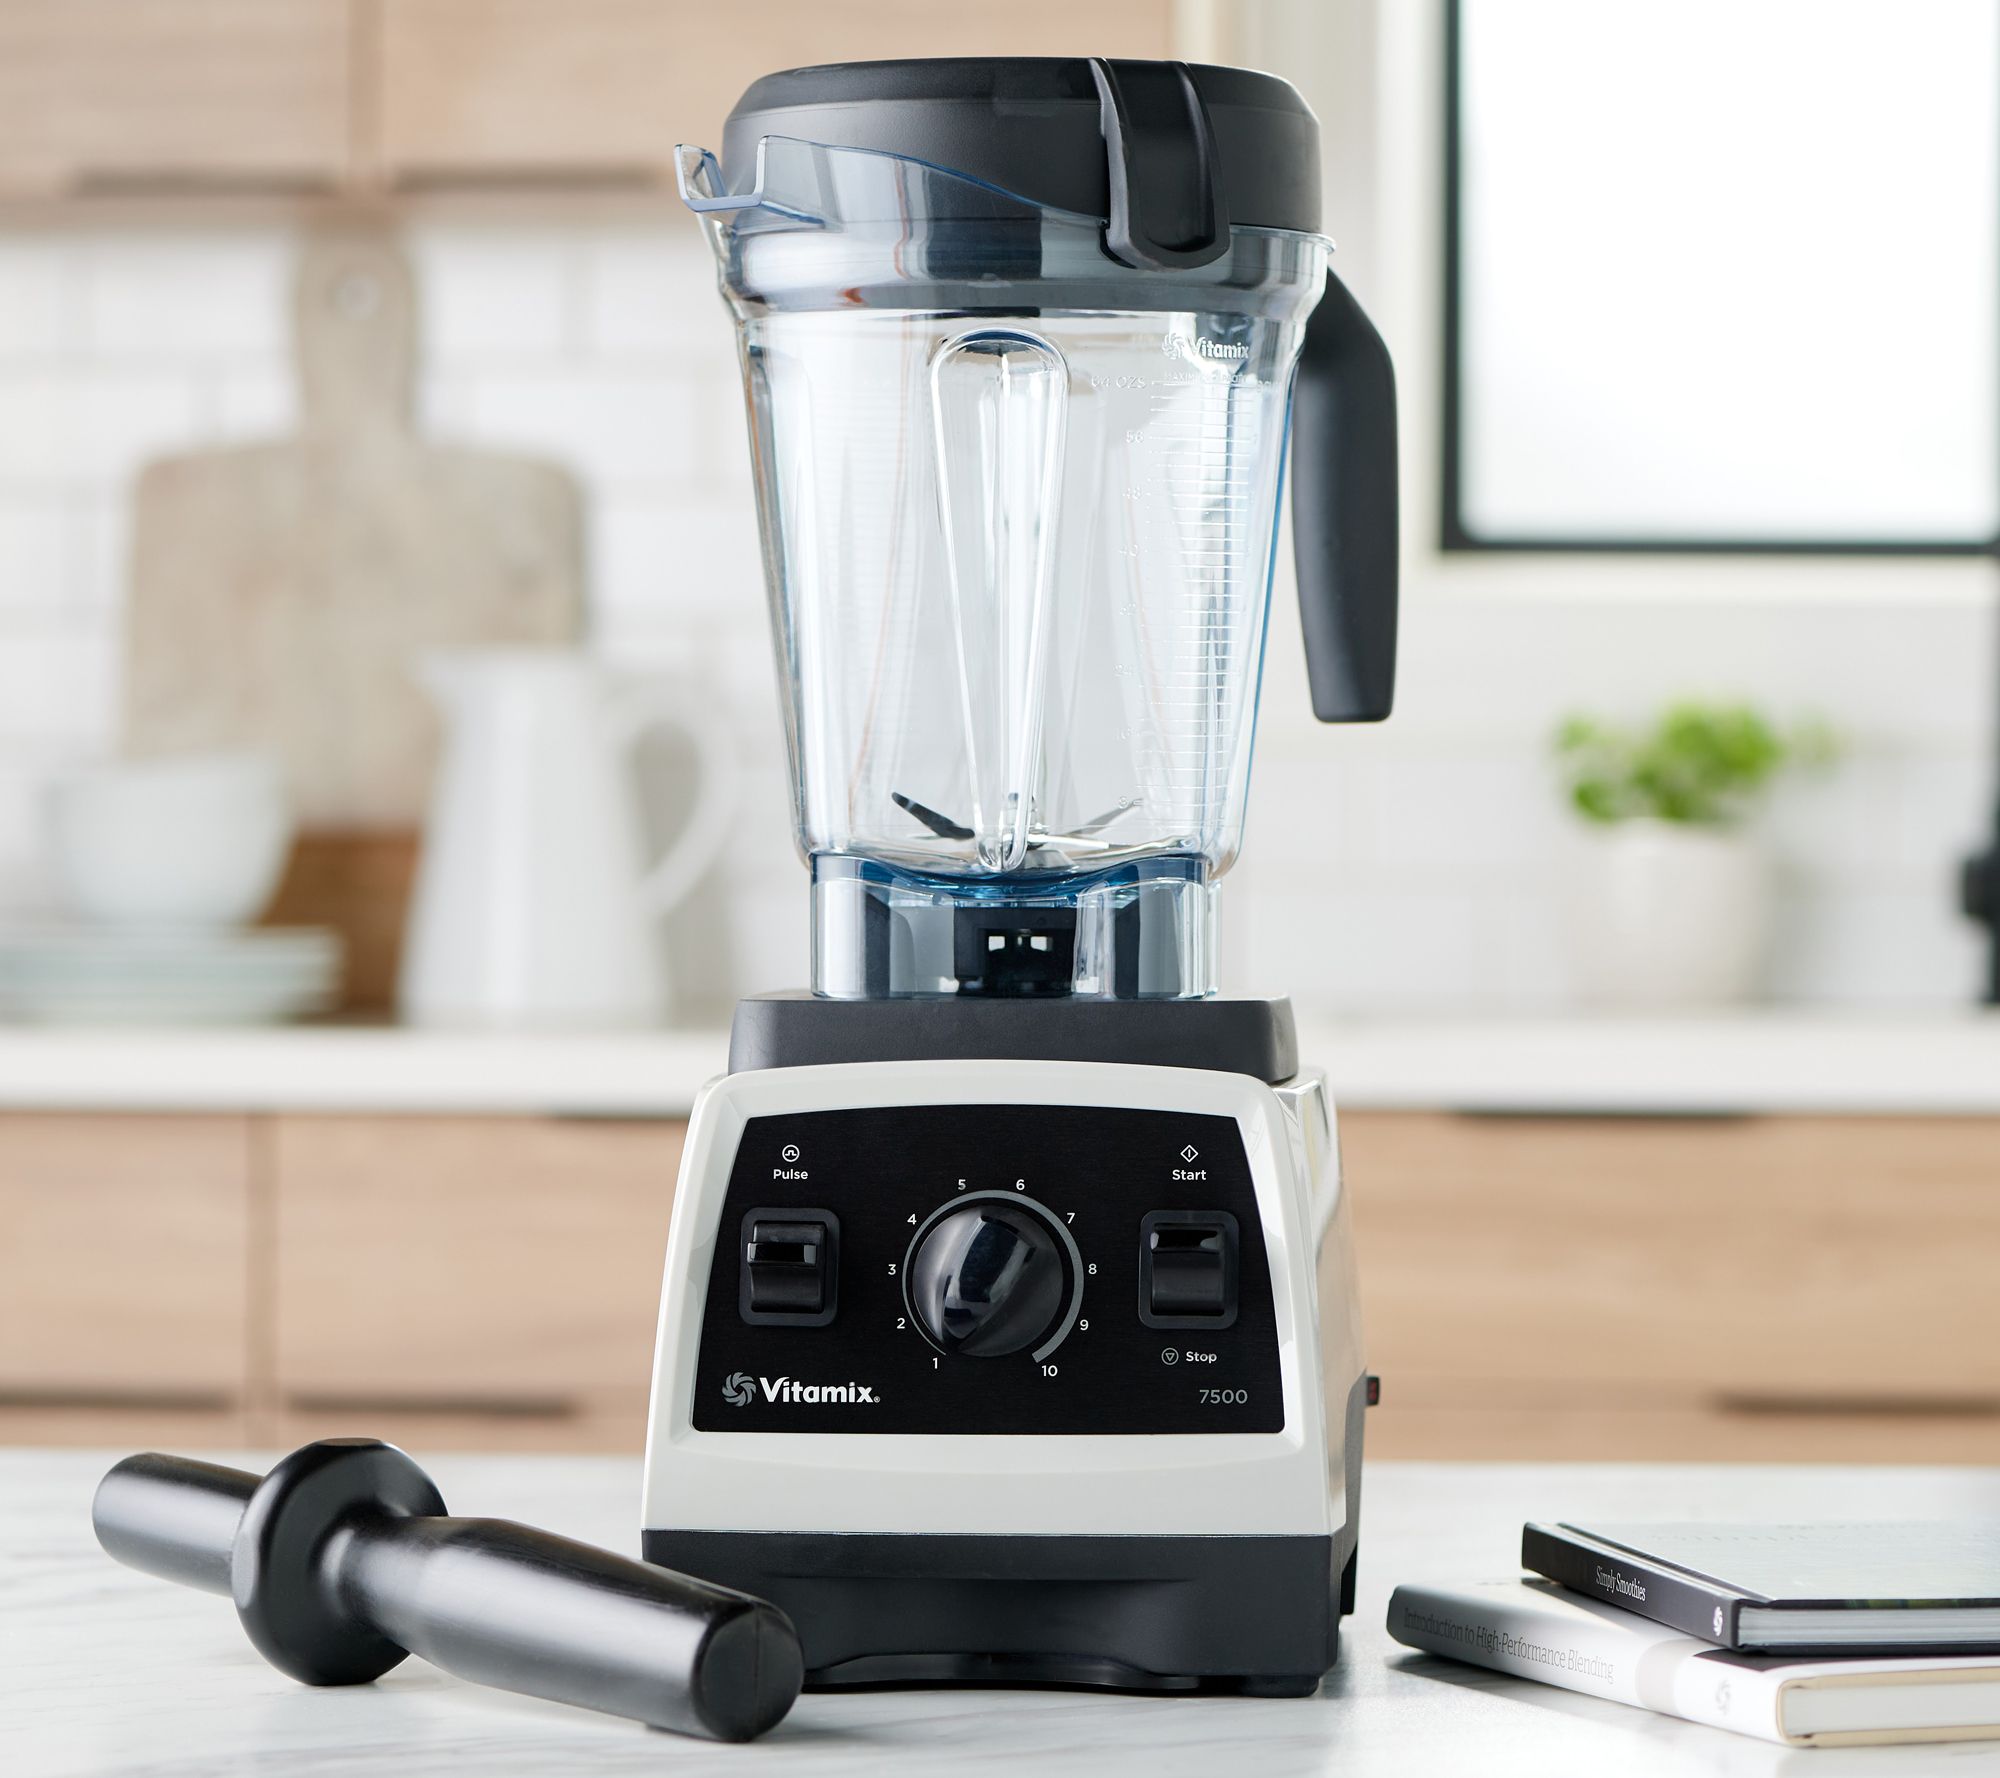 Nutribullet Go Compact 13-oz Rechargeable Portable Blender on QVC 